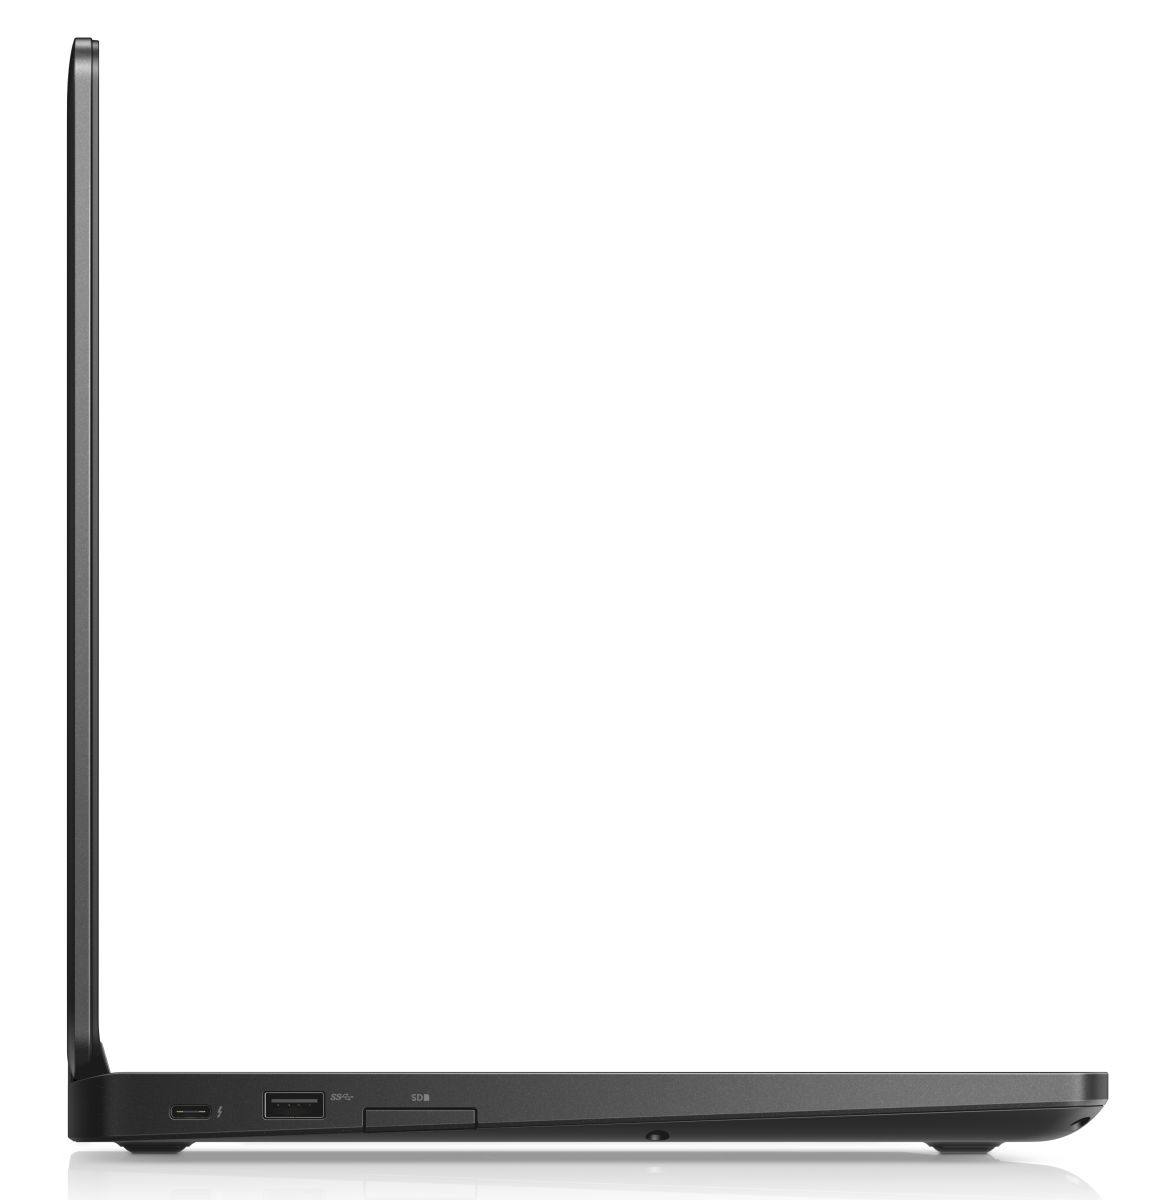 DELL Latitude 5490 - 5490-3978 laptop specifications